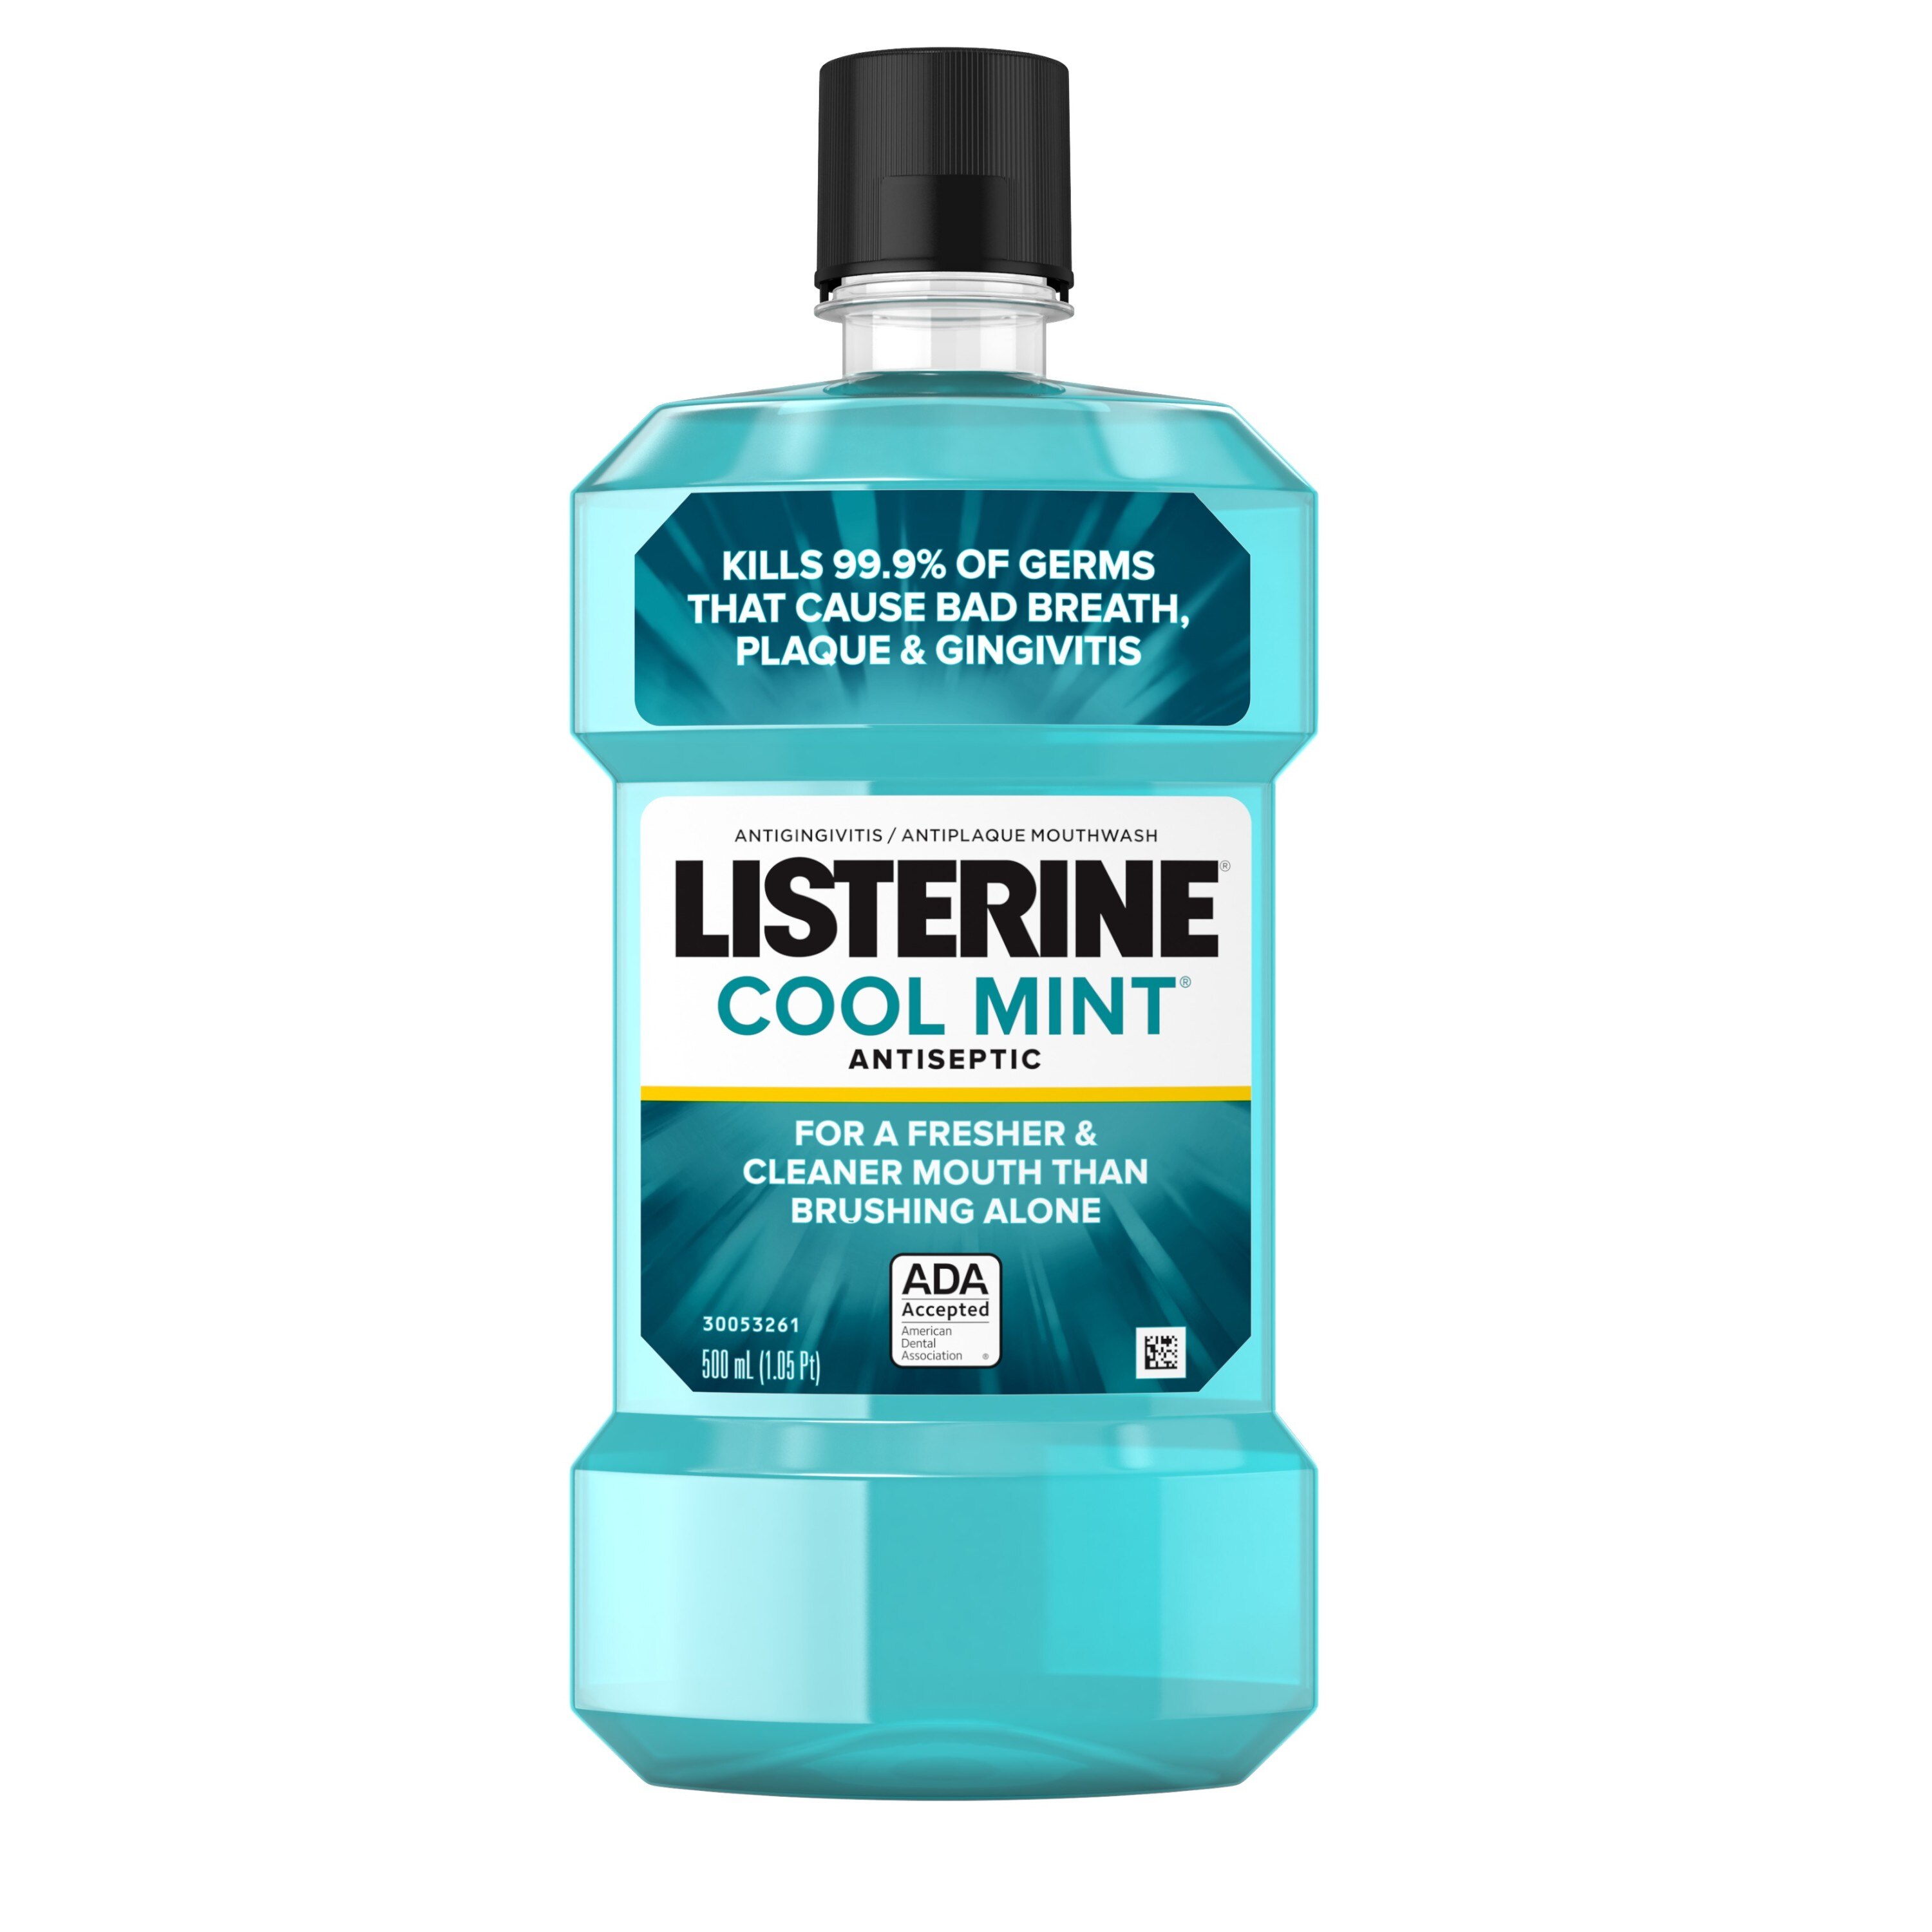 Listerine Cool Mint Antiseptic Mouthwash for Bad Breath, Plaque, and Gingivitis